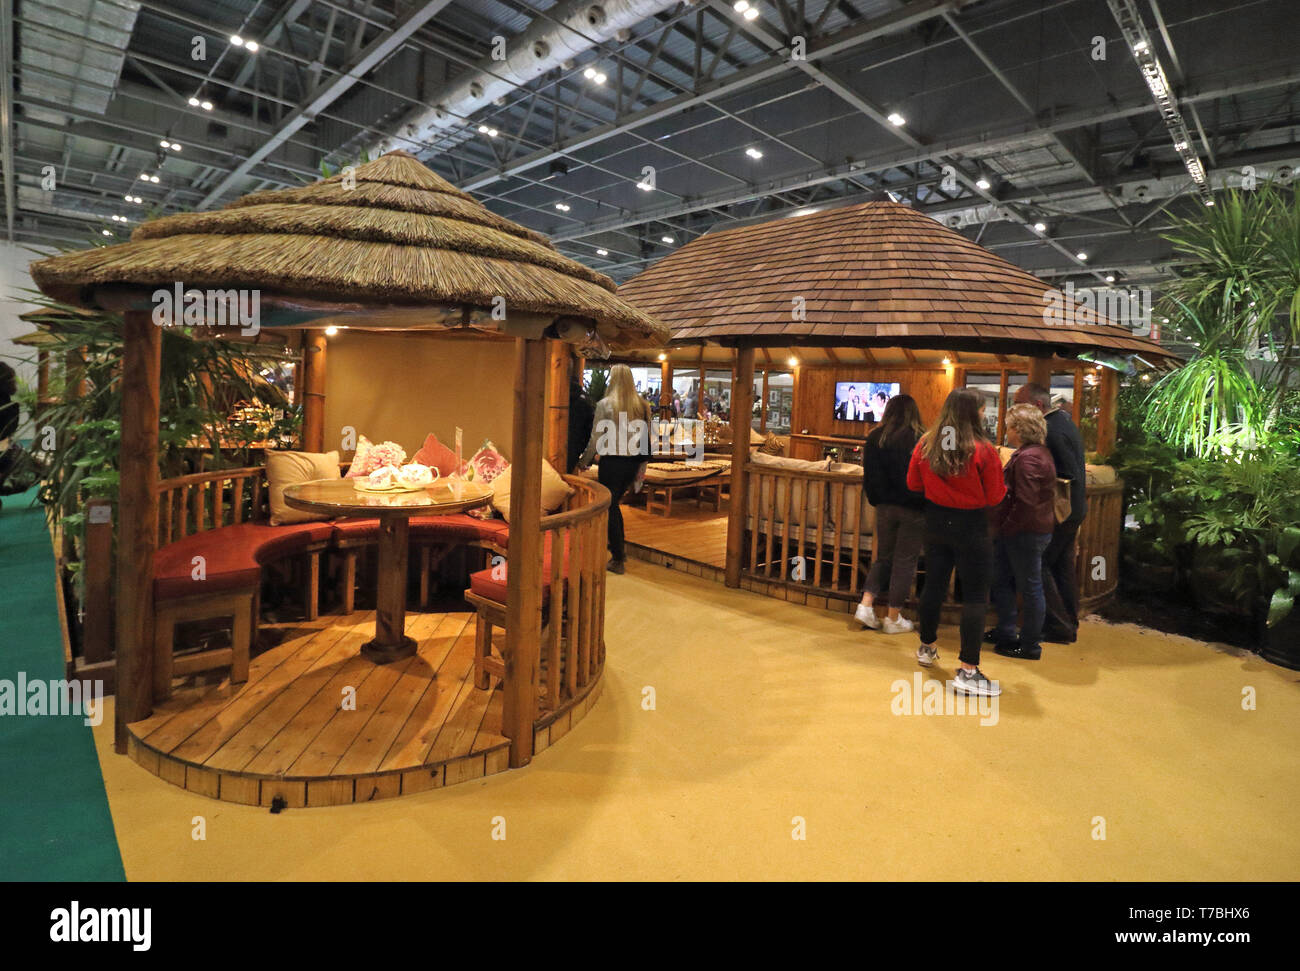 London, UK. 5th May, 2019. Outdoor seating cabanas seen displayed during the exhibition.Grand Designs Live exhibition sponsored by Anglian Home Improvements, with more than 500 exhibitors in zones for sustainable technology, self-build, design, grand technology, interiors, kitchens & bathrooms, gardens, food & housewares. The show offers visitors a unique opportunity to see all the latest trends for the home as well as many products never seen before. Based on the Channel 4 TV series and held at Excel London. Credit: Keith Mayhew/SOPA Images/ZUMA Wire/Alamy Live News Stock Photo